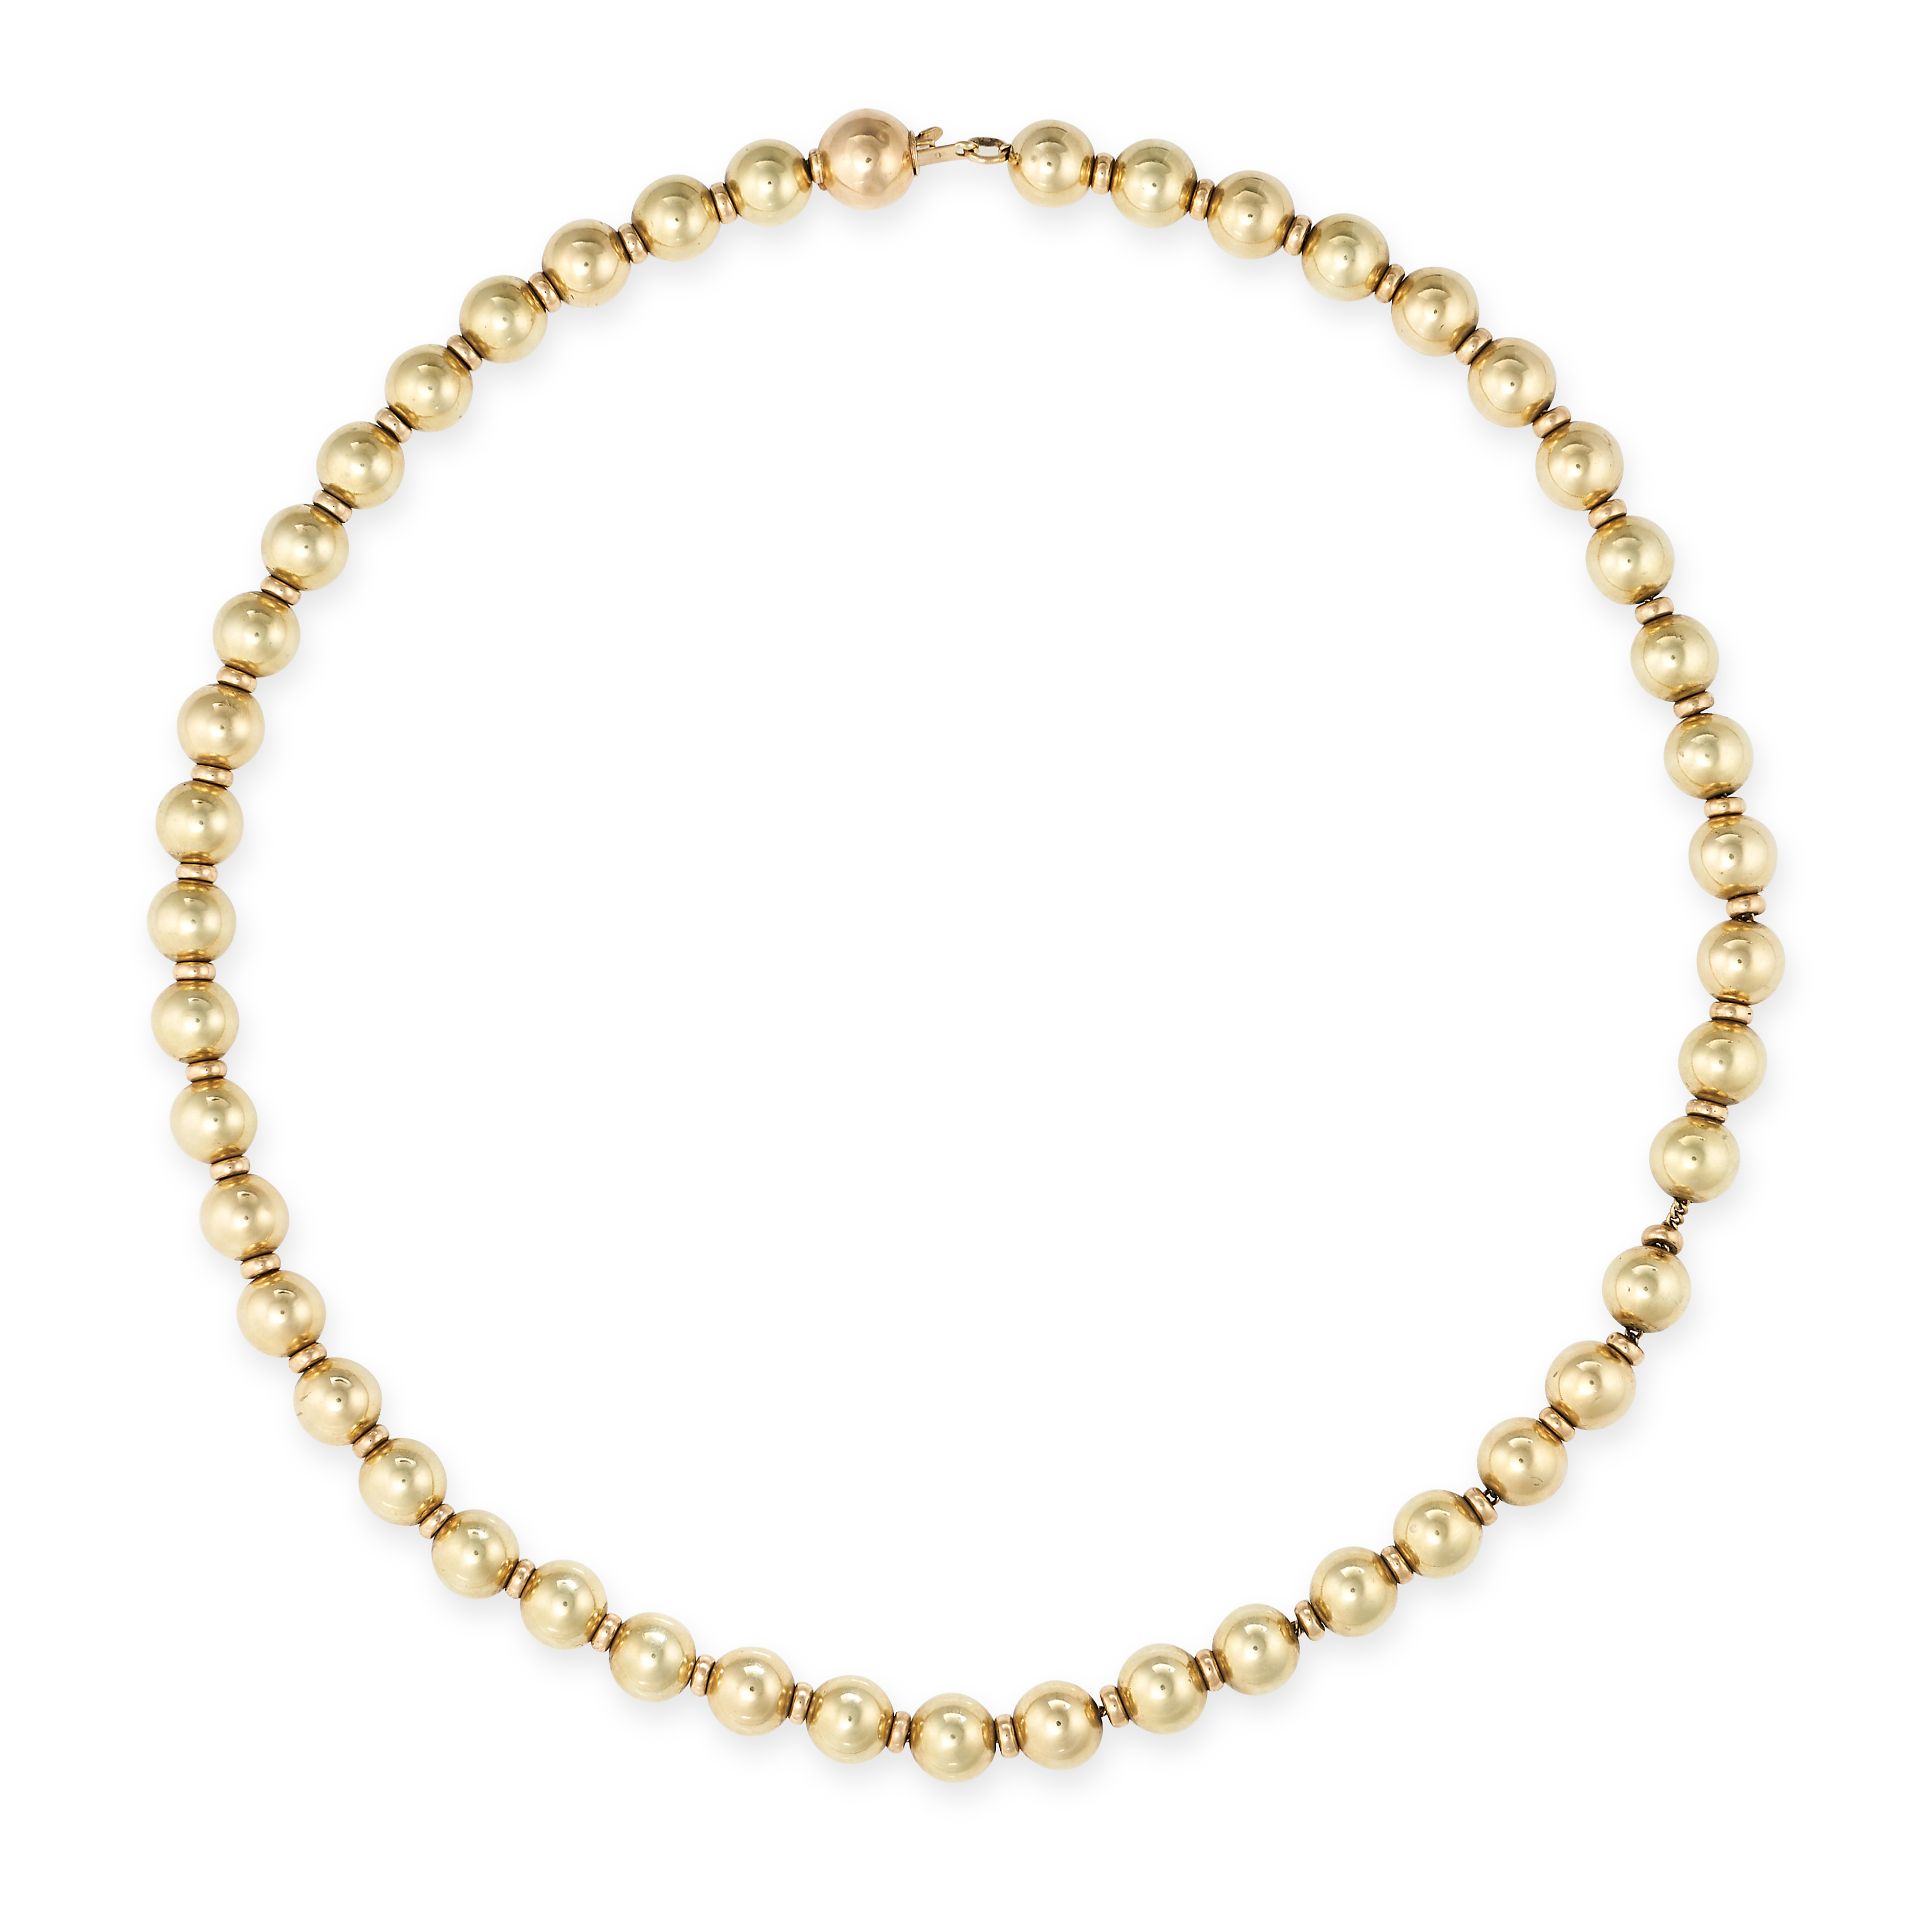 A GOLD BEAD NECKLACE in yellow gold, comprising a gold chain strung with gold beads, French impor...